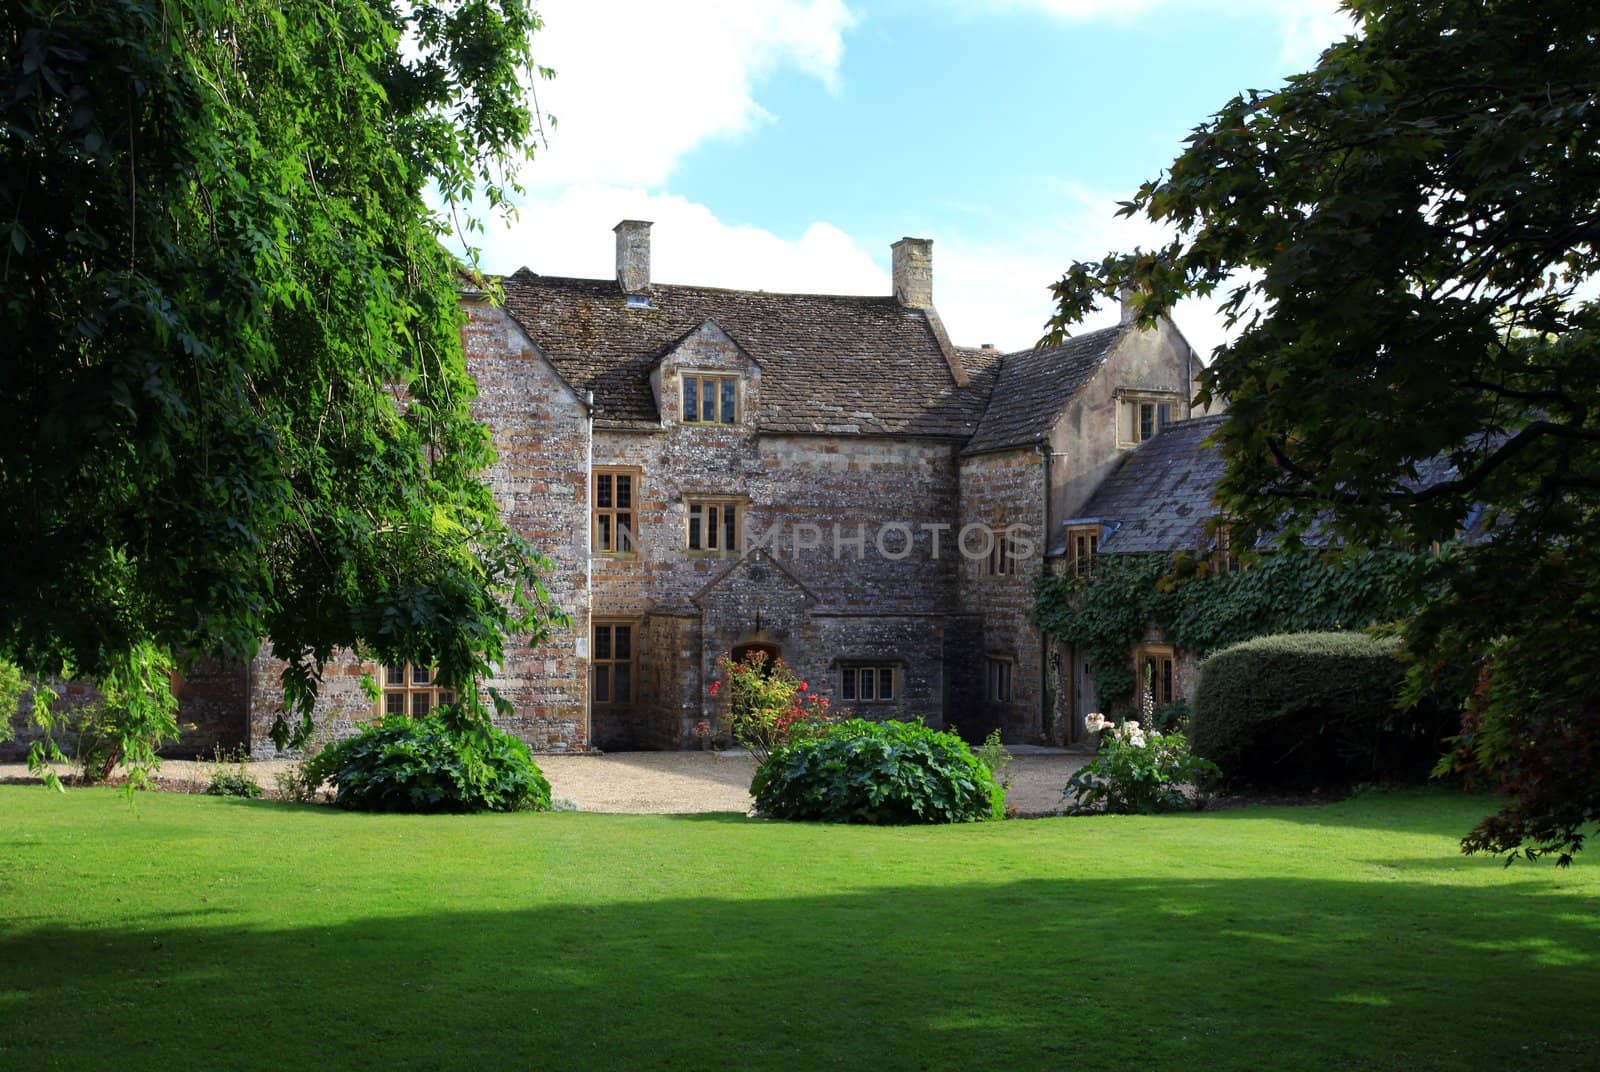 England traditional manor house in Cerne Abbas Dorset English countryside